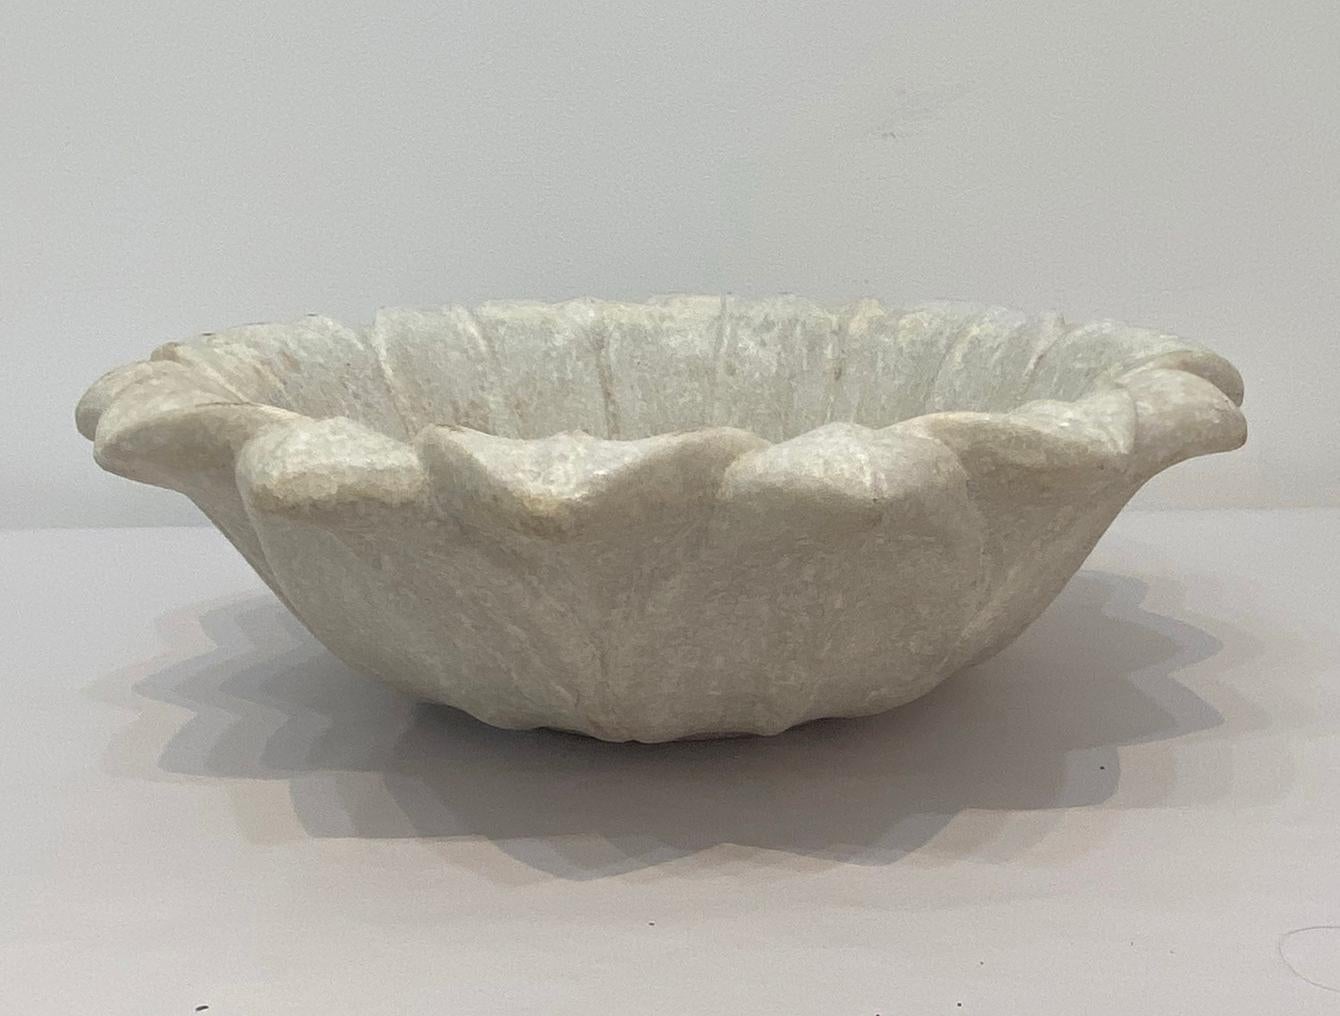 Craved marble lotus bowl with foliate designed rim. Delicately craved beautiful accent piece for your garden.